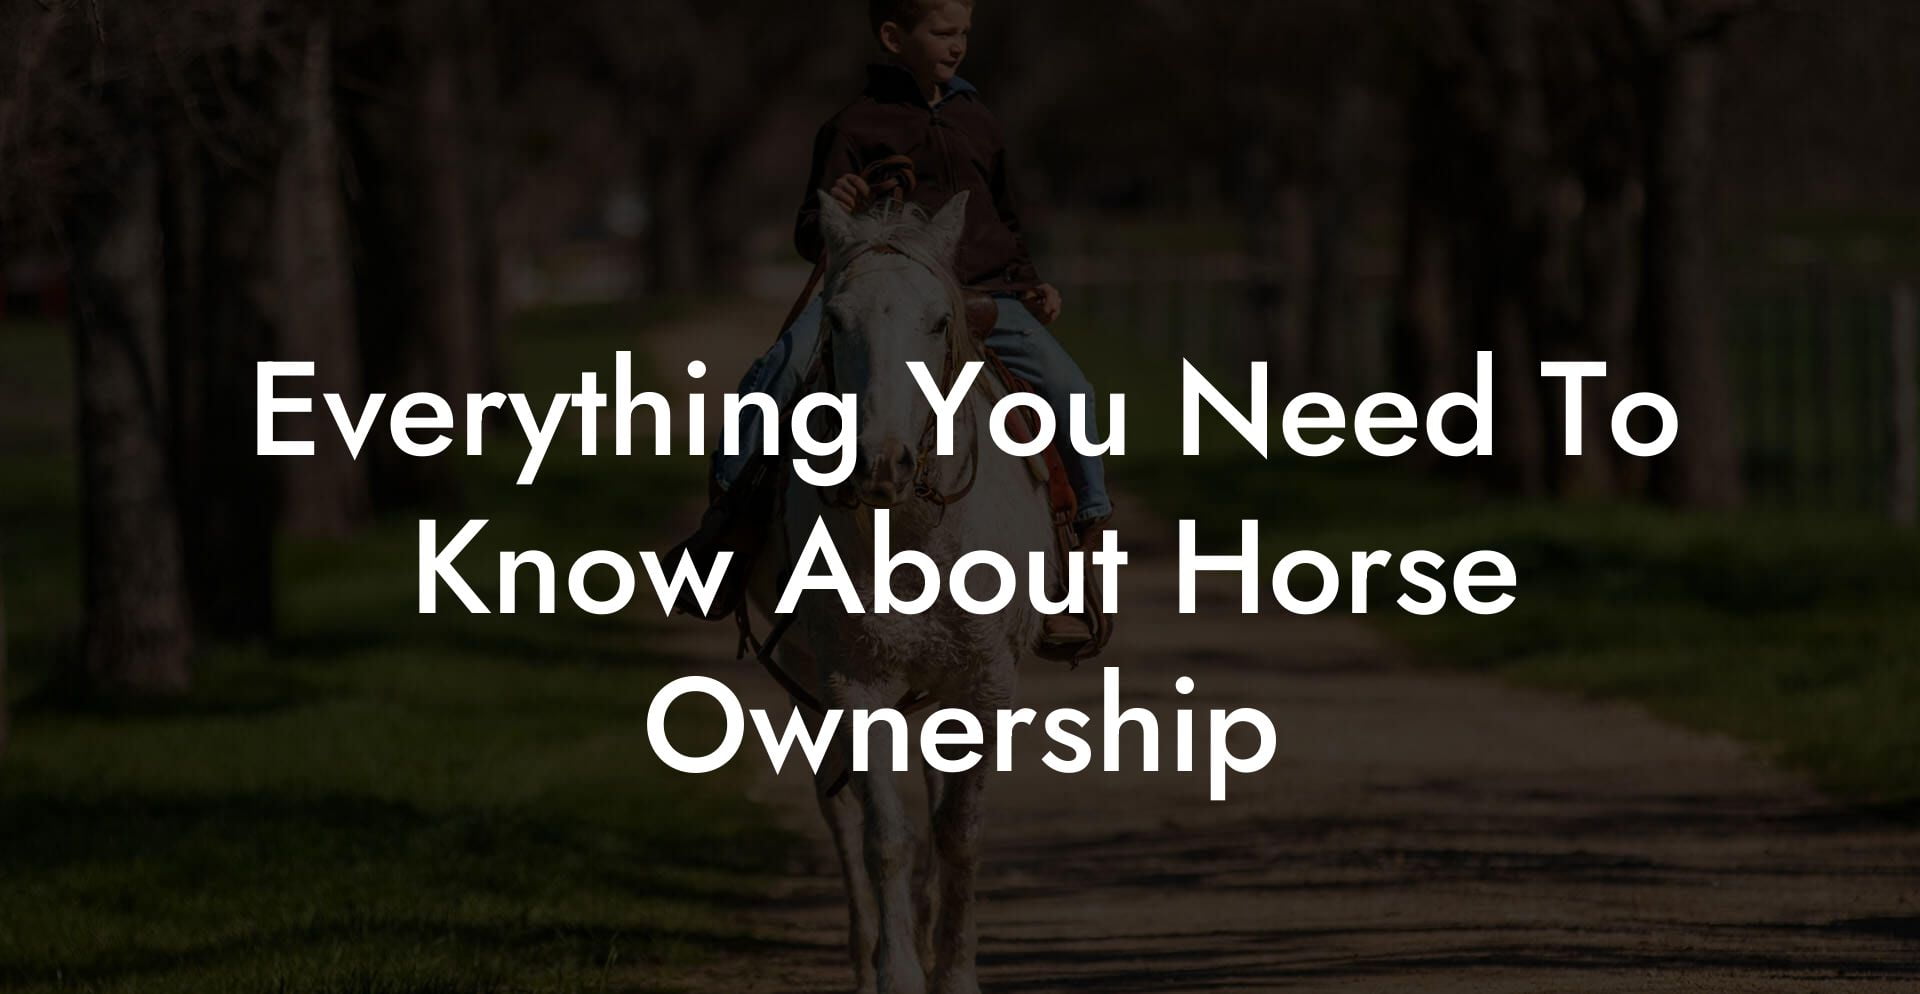 Everything You Need To Know About Horse Ownership